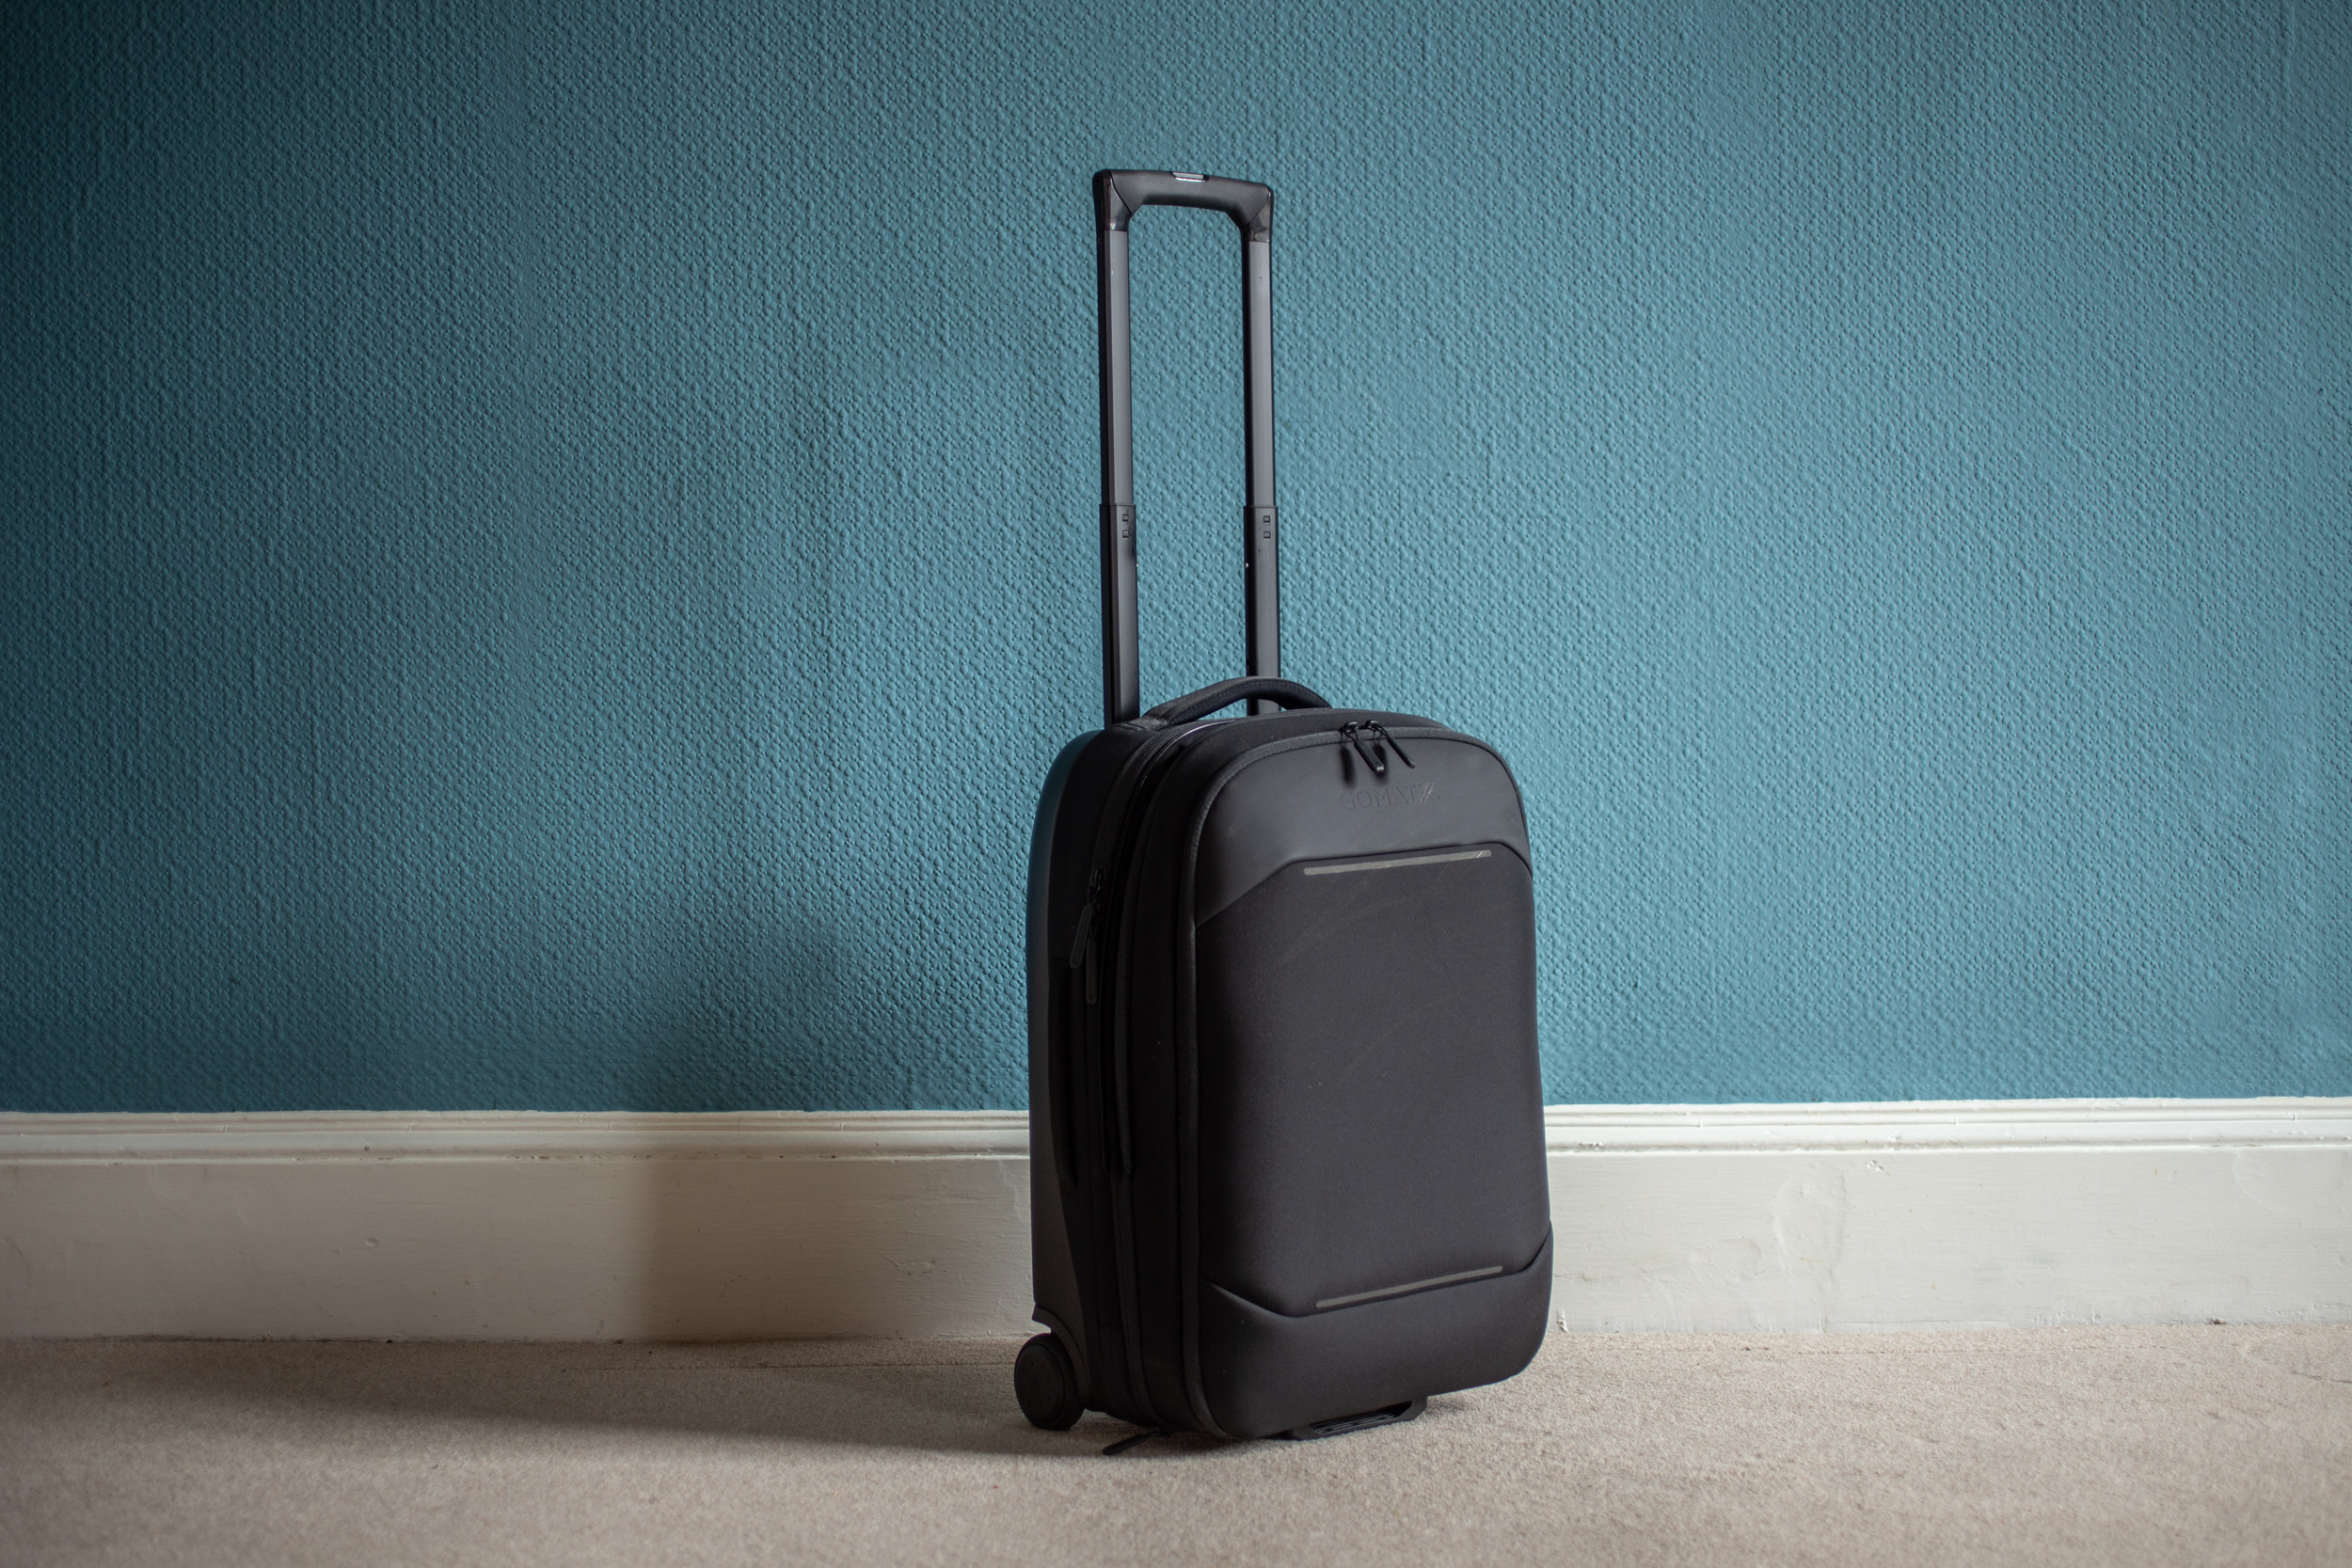 https://www.cnet.com/a/img/hub/2022/08/31/3376dbe8-e30d-4f8e-b042-e0582fb039d2/cnet-best-luggage-suitcase-carry-on-2.jpg